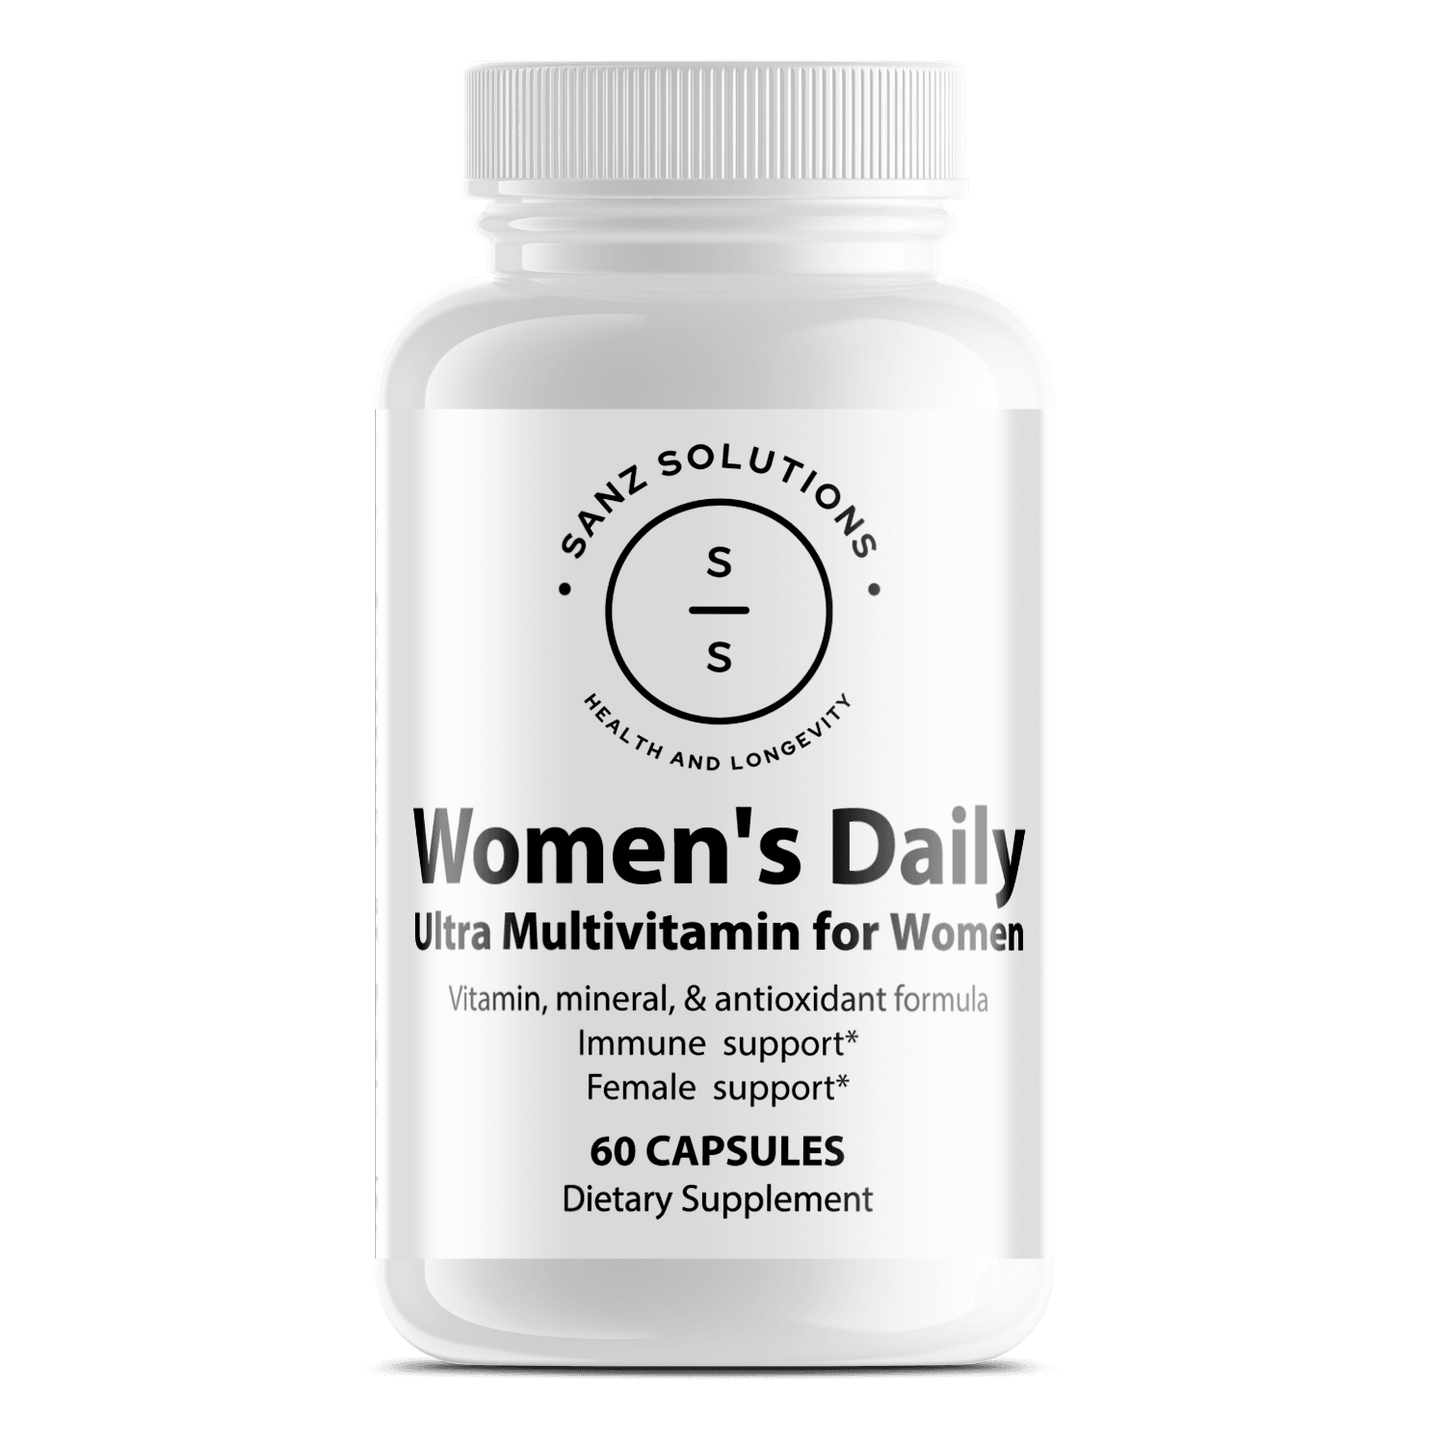 Women's Daily - Ultra Multivitamin for Women - Sanz Solutions Health and Longevity